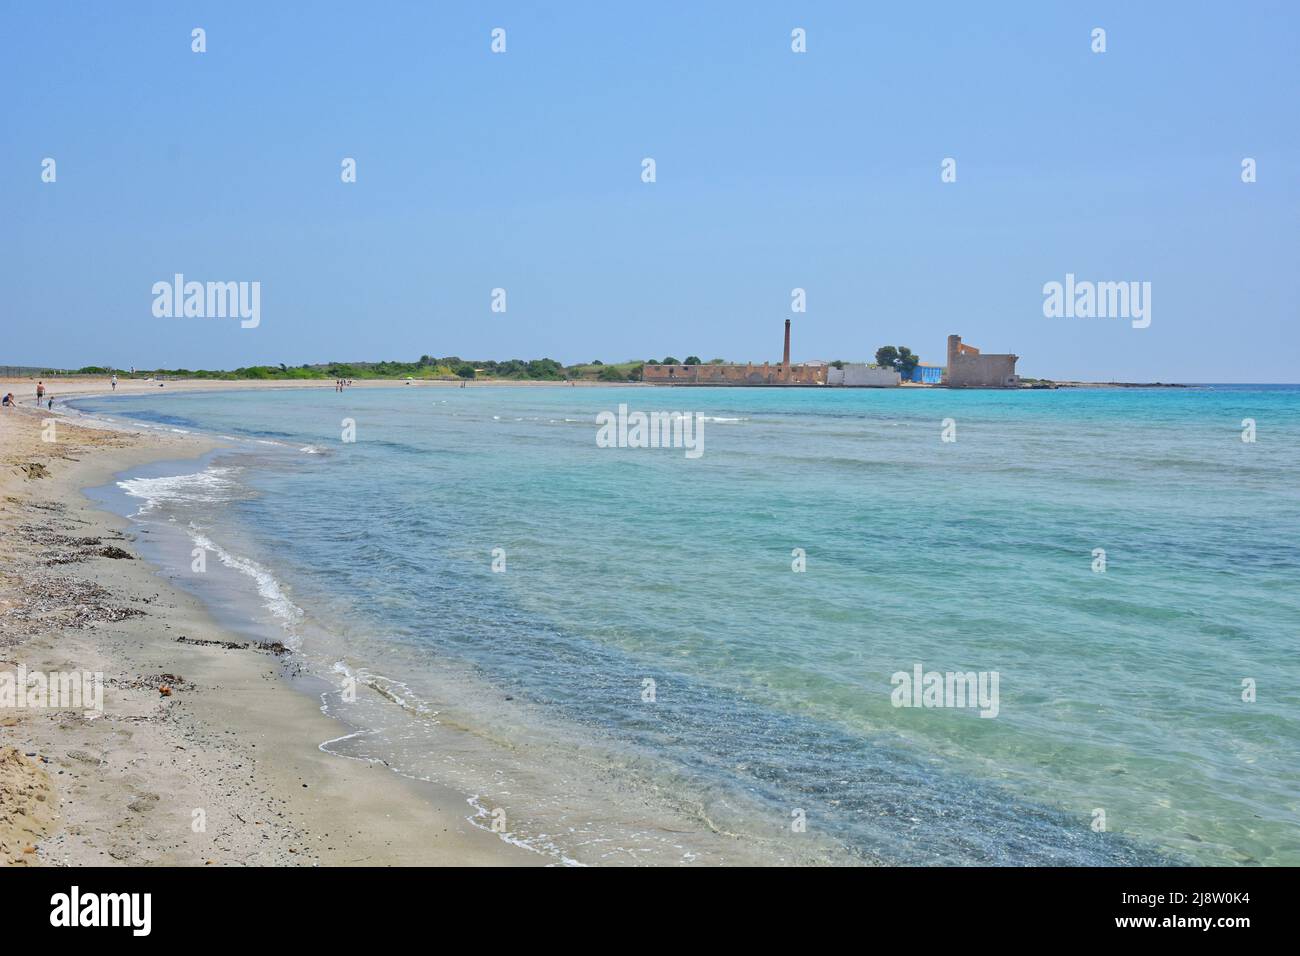 The beach of the marine reserve of Vendicari, a natural oasis in Sicily, Italy. Stock Photo